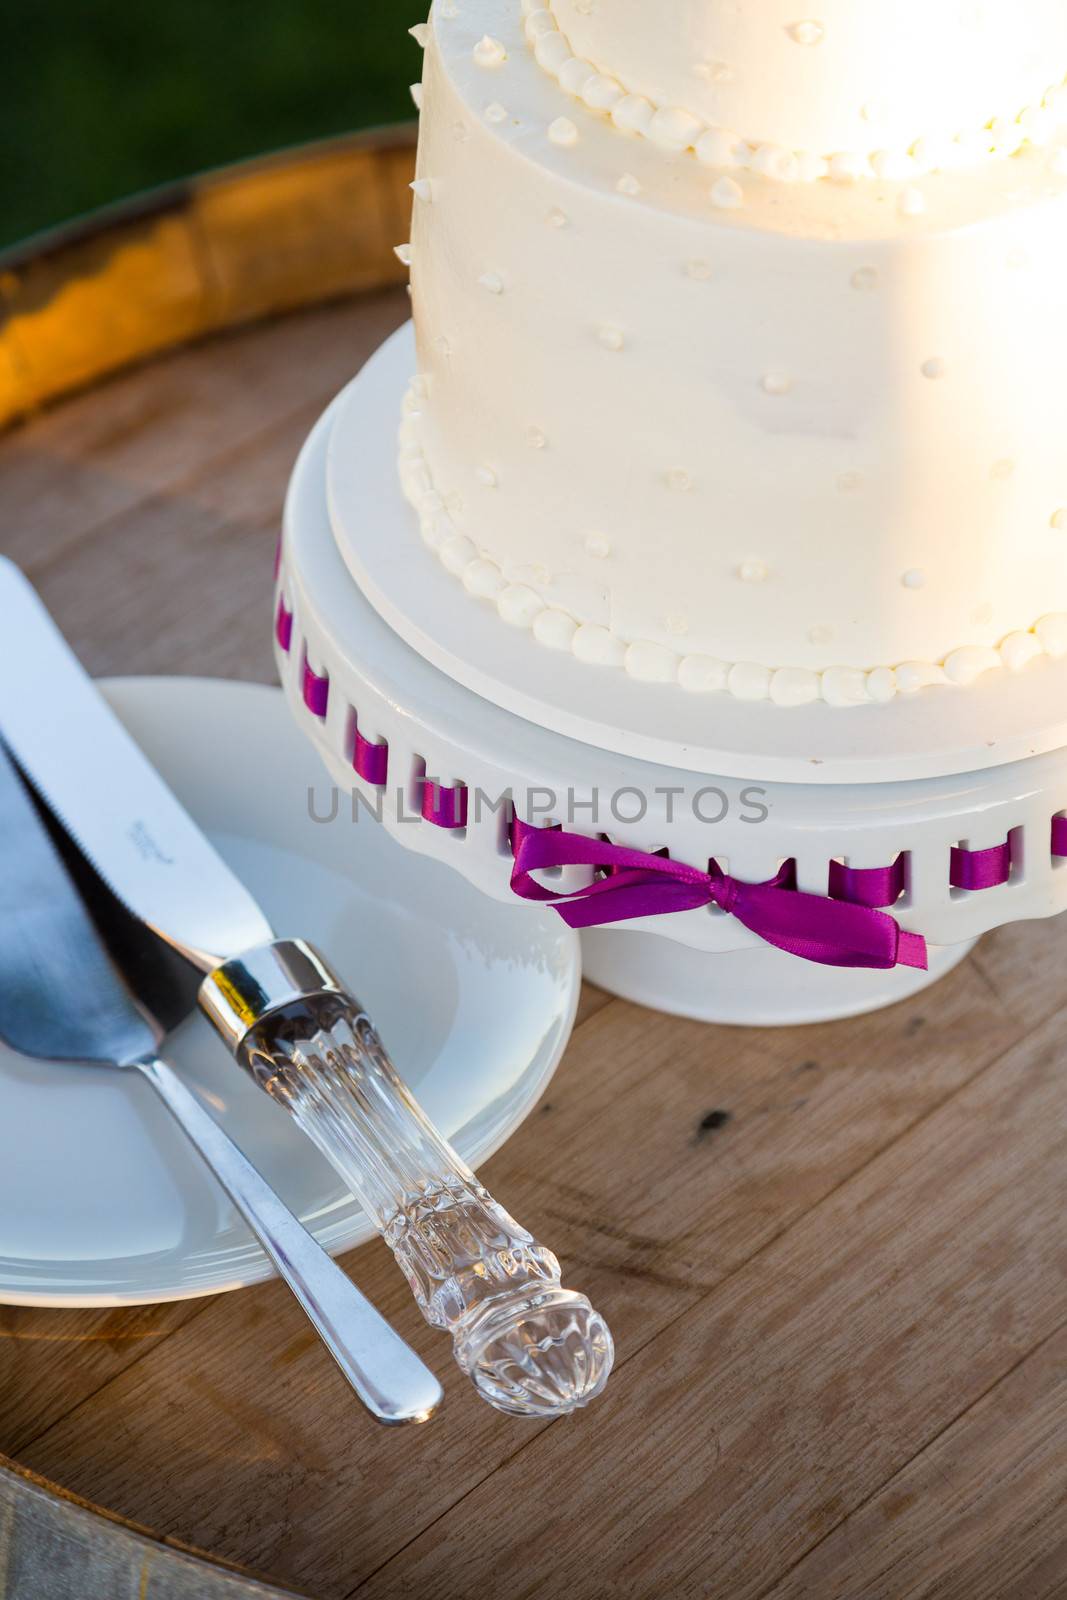 A wedding cake is ready to be cut at a reception on the bride and groom wedding day.